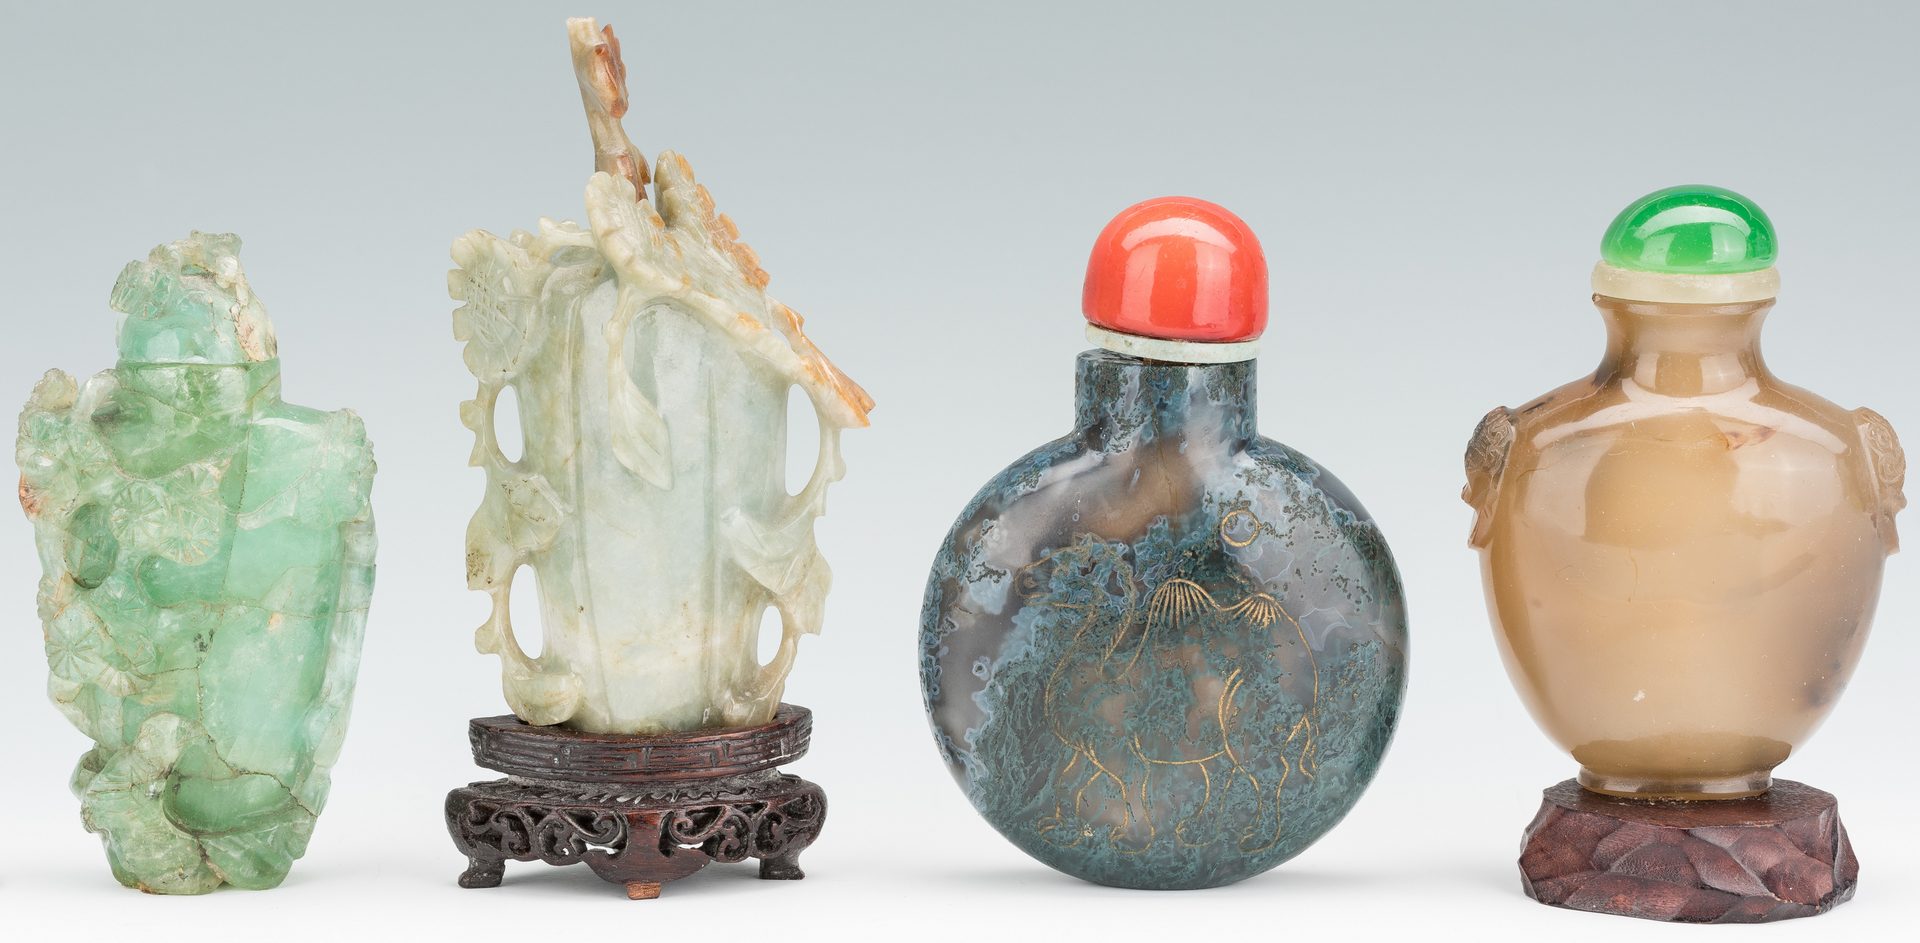 Lot 383: 4 Chinese Snuff Bottles, incl. 1 Jade